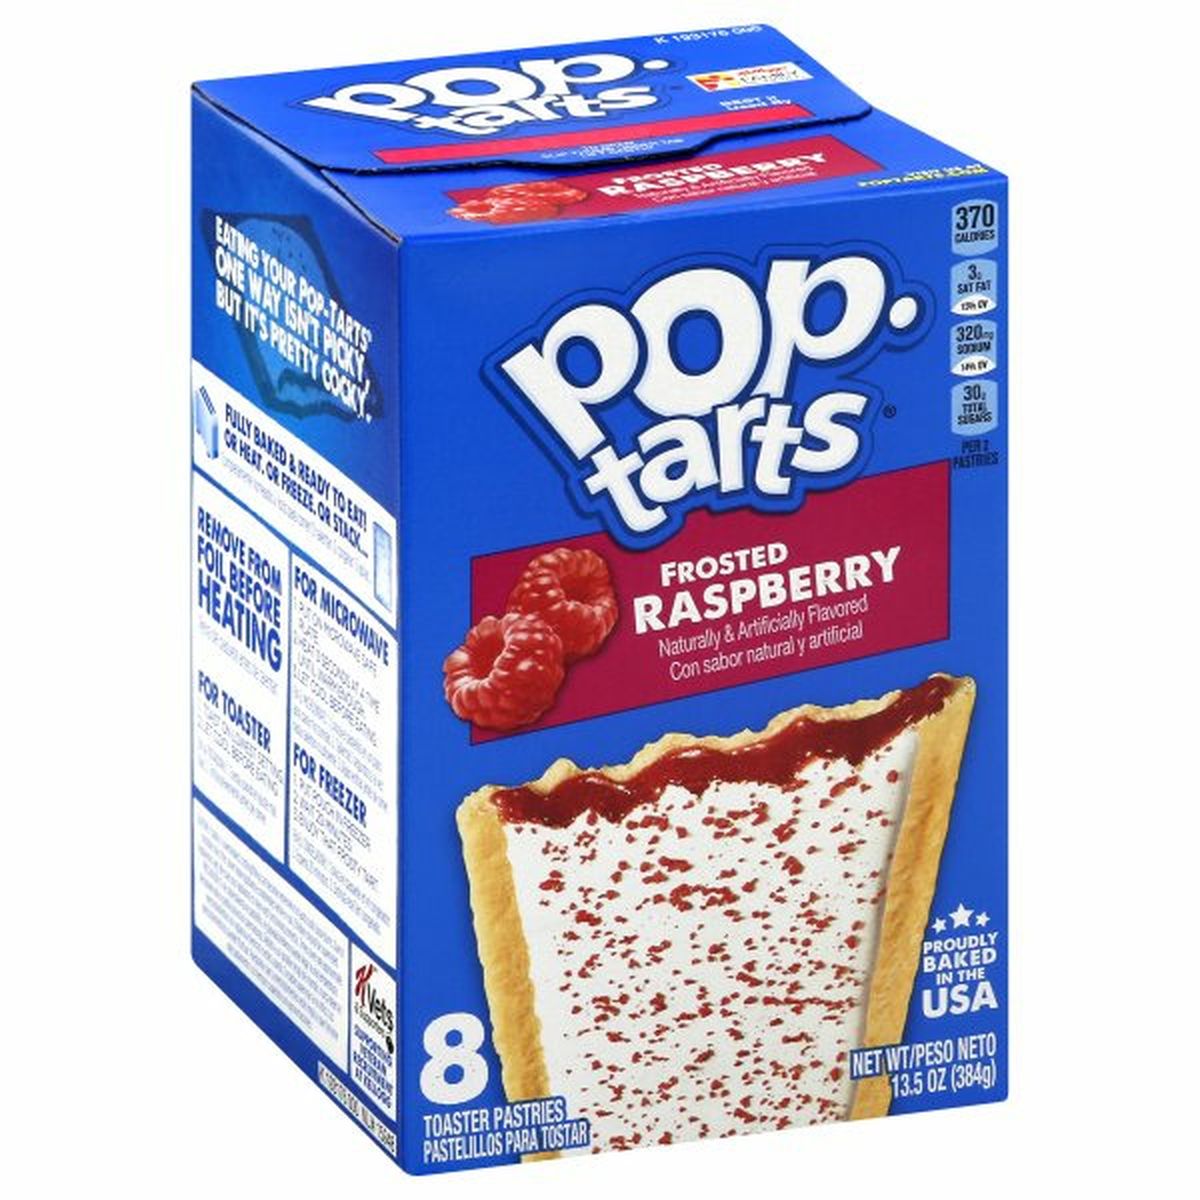 Calories in Kellogg's Pop-Tarts Toaster Pastries, Frosted, Raspberry